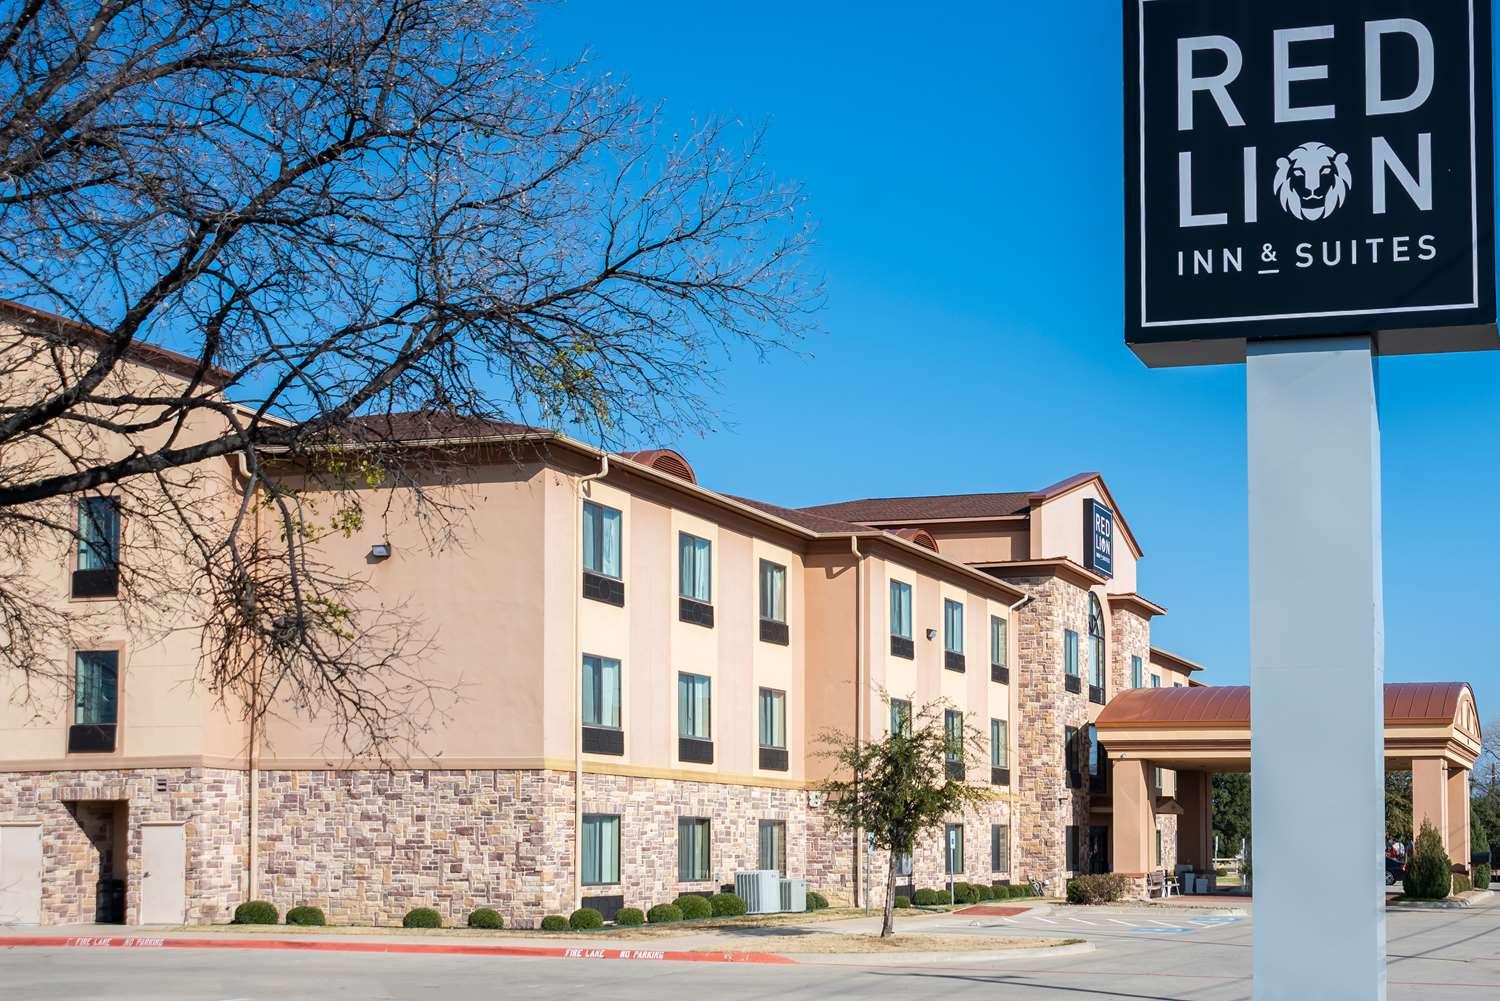 Red Lion Inn & Suites Mineral Wells in Mineral Wells, TX